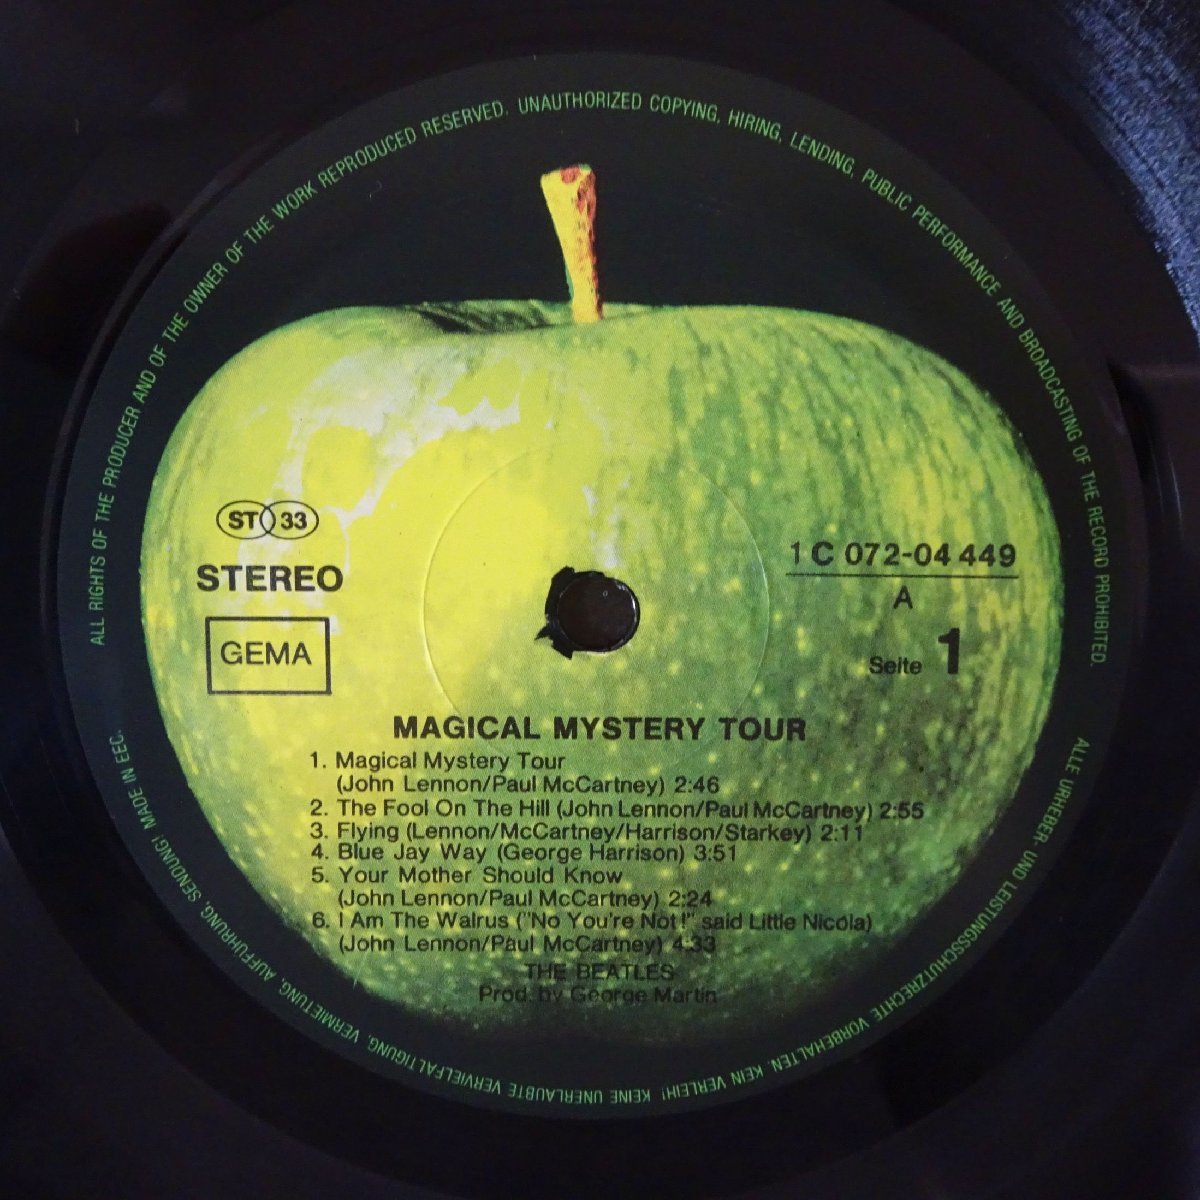 11181119;【Germany盤】The Beatles / Magical Mystery Tour Plus Other Songs_画像3